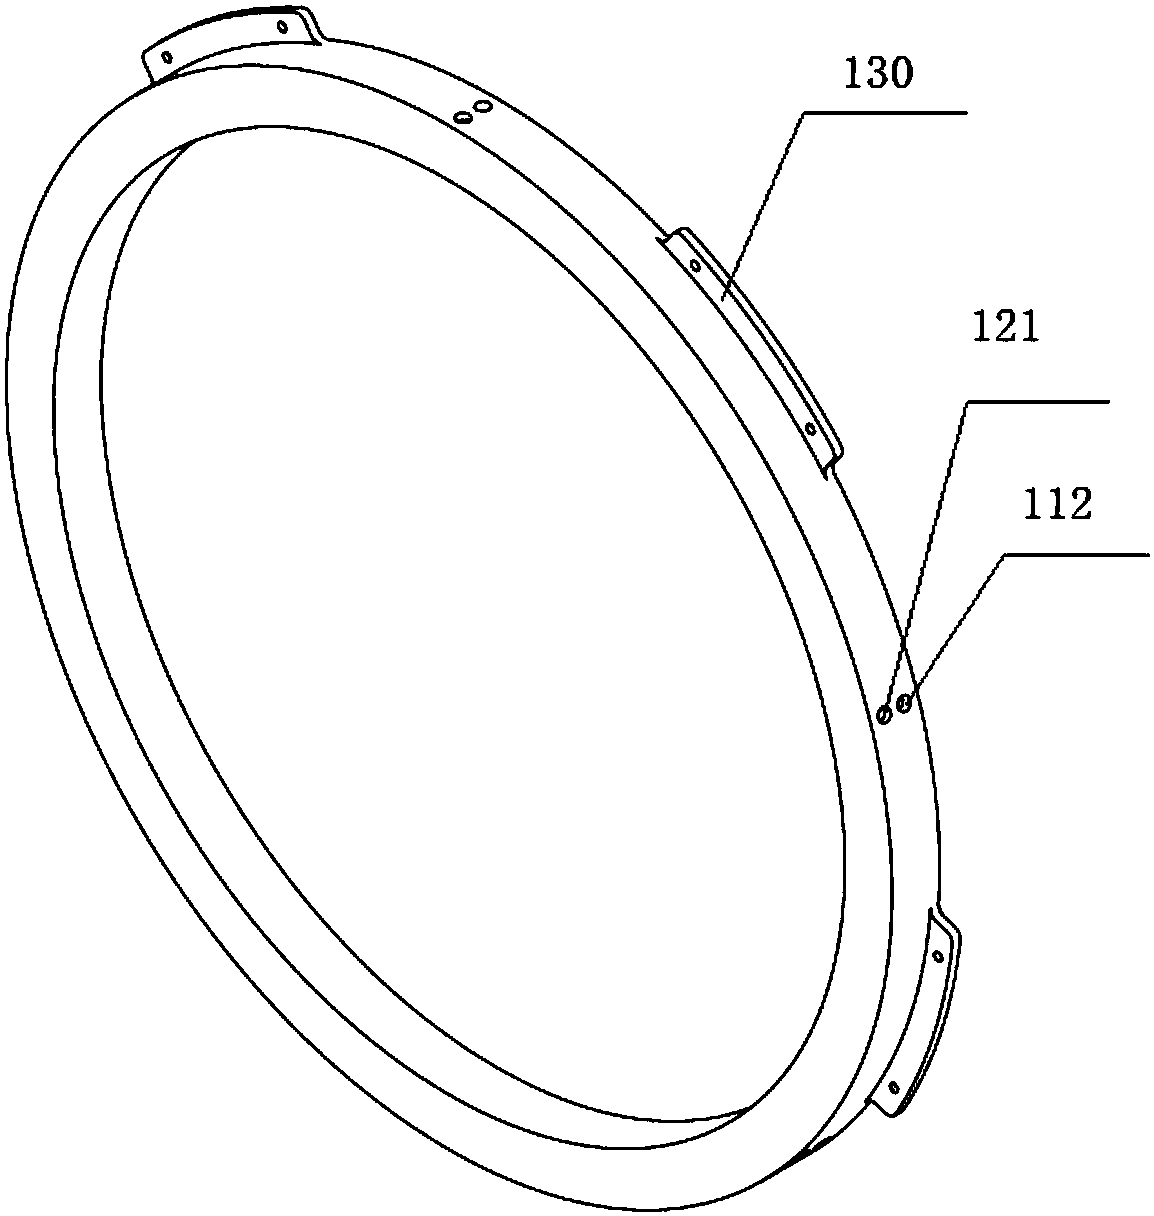 Cooling water tank for imaging device